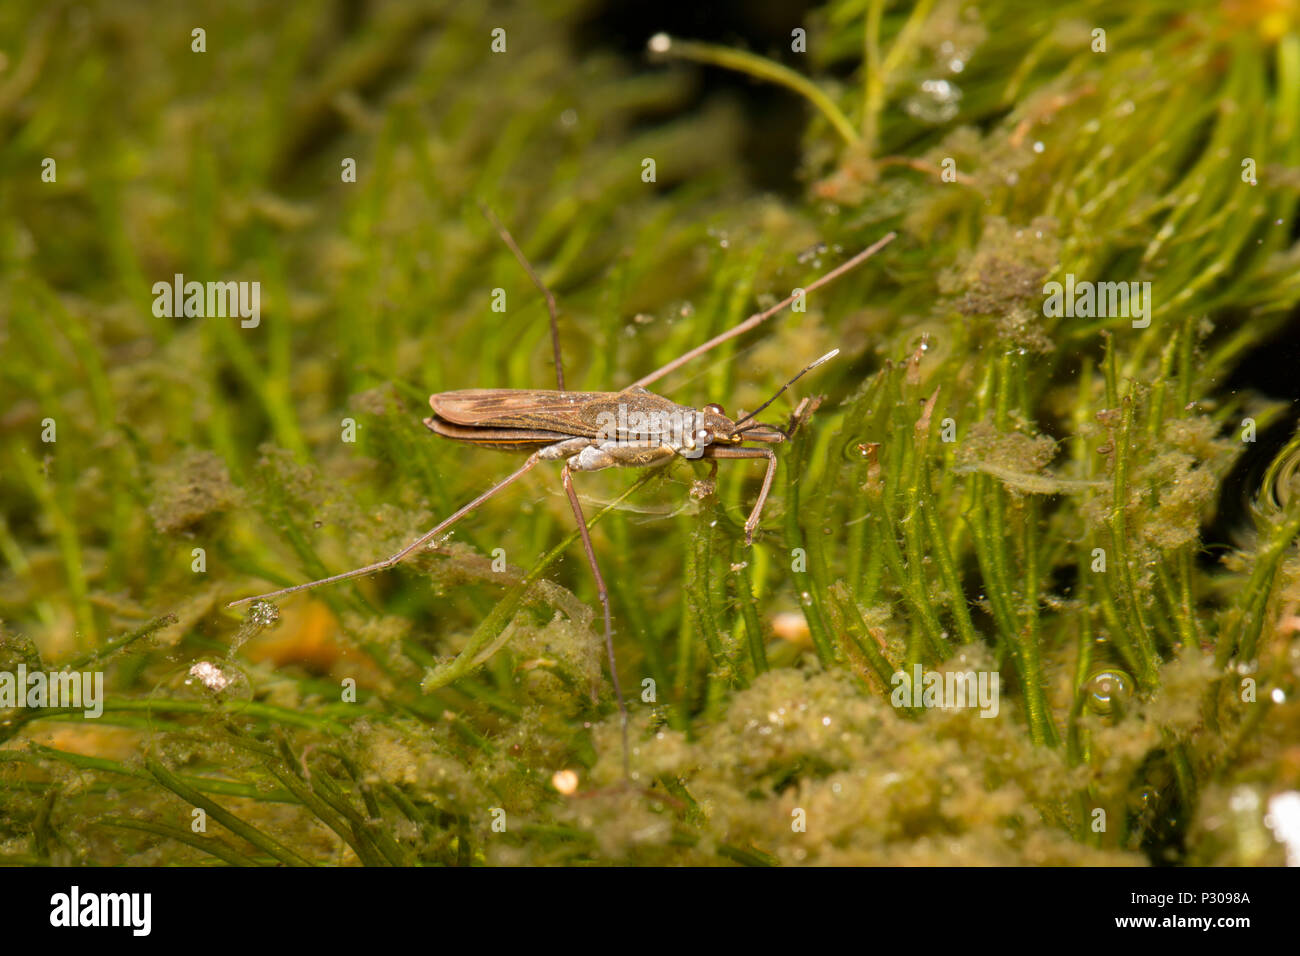 A pond skater, Gerris lacustris, photographed at night on a garden pond. Lancashire North West England UK GB Stock Photo